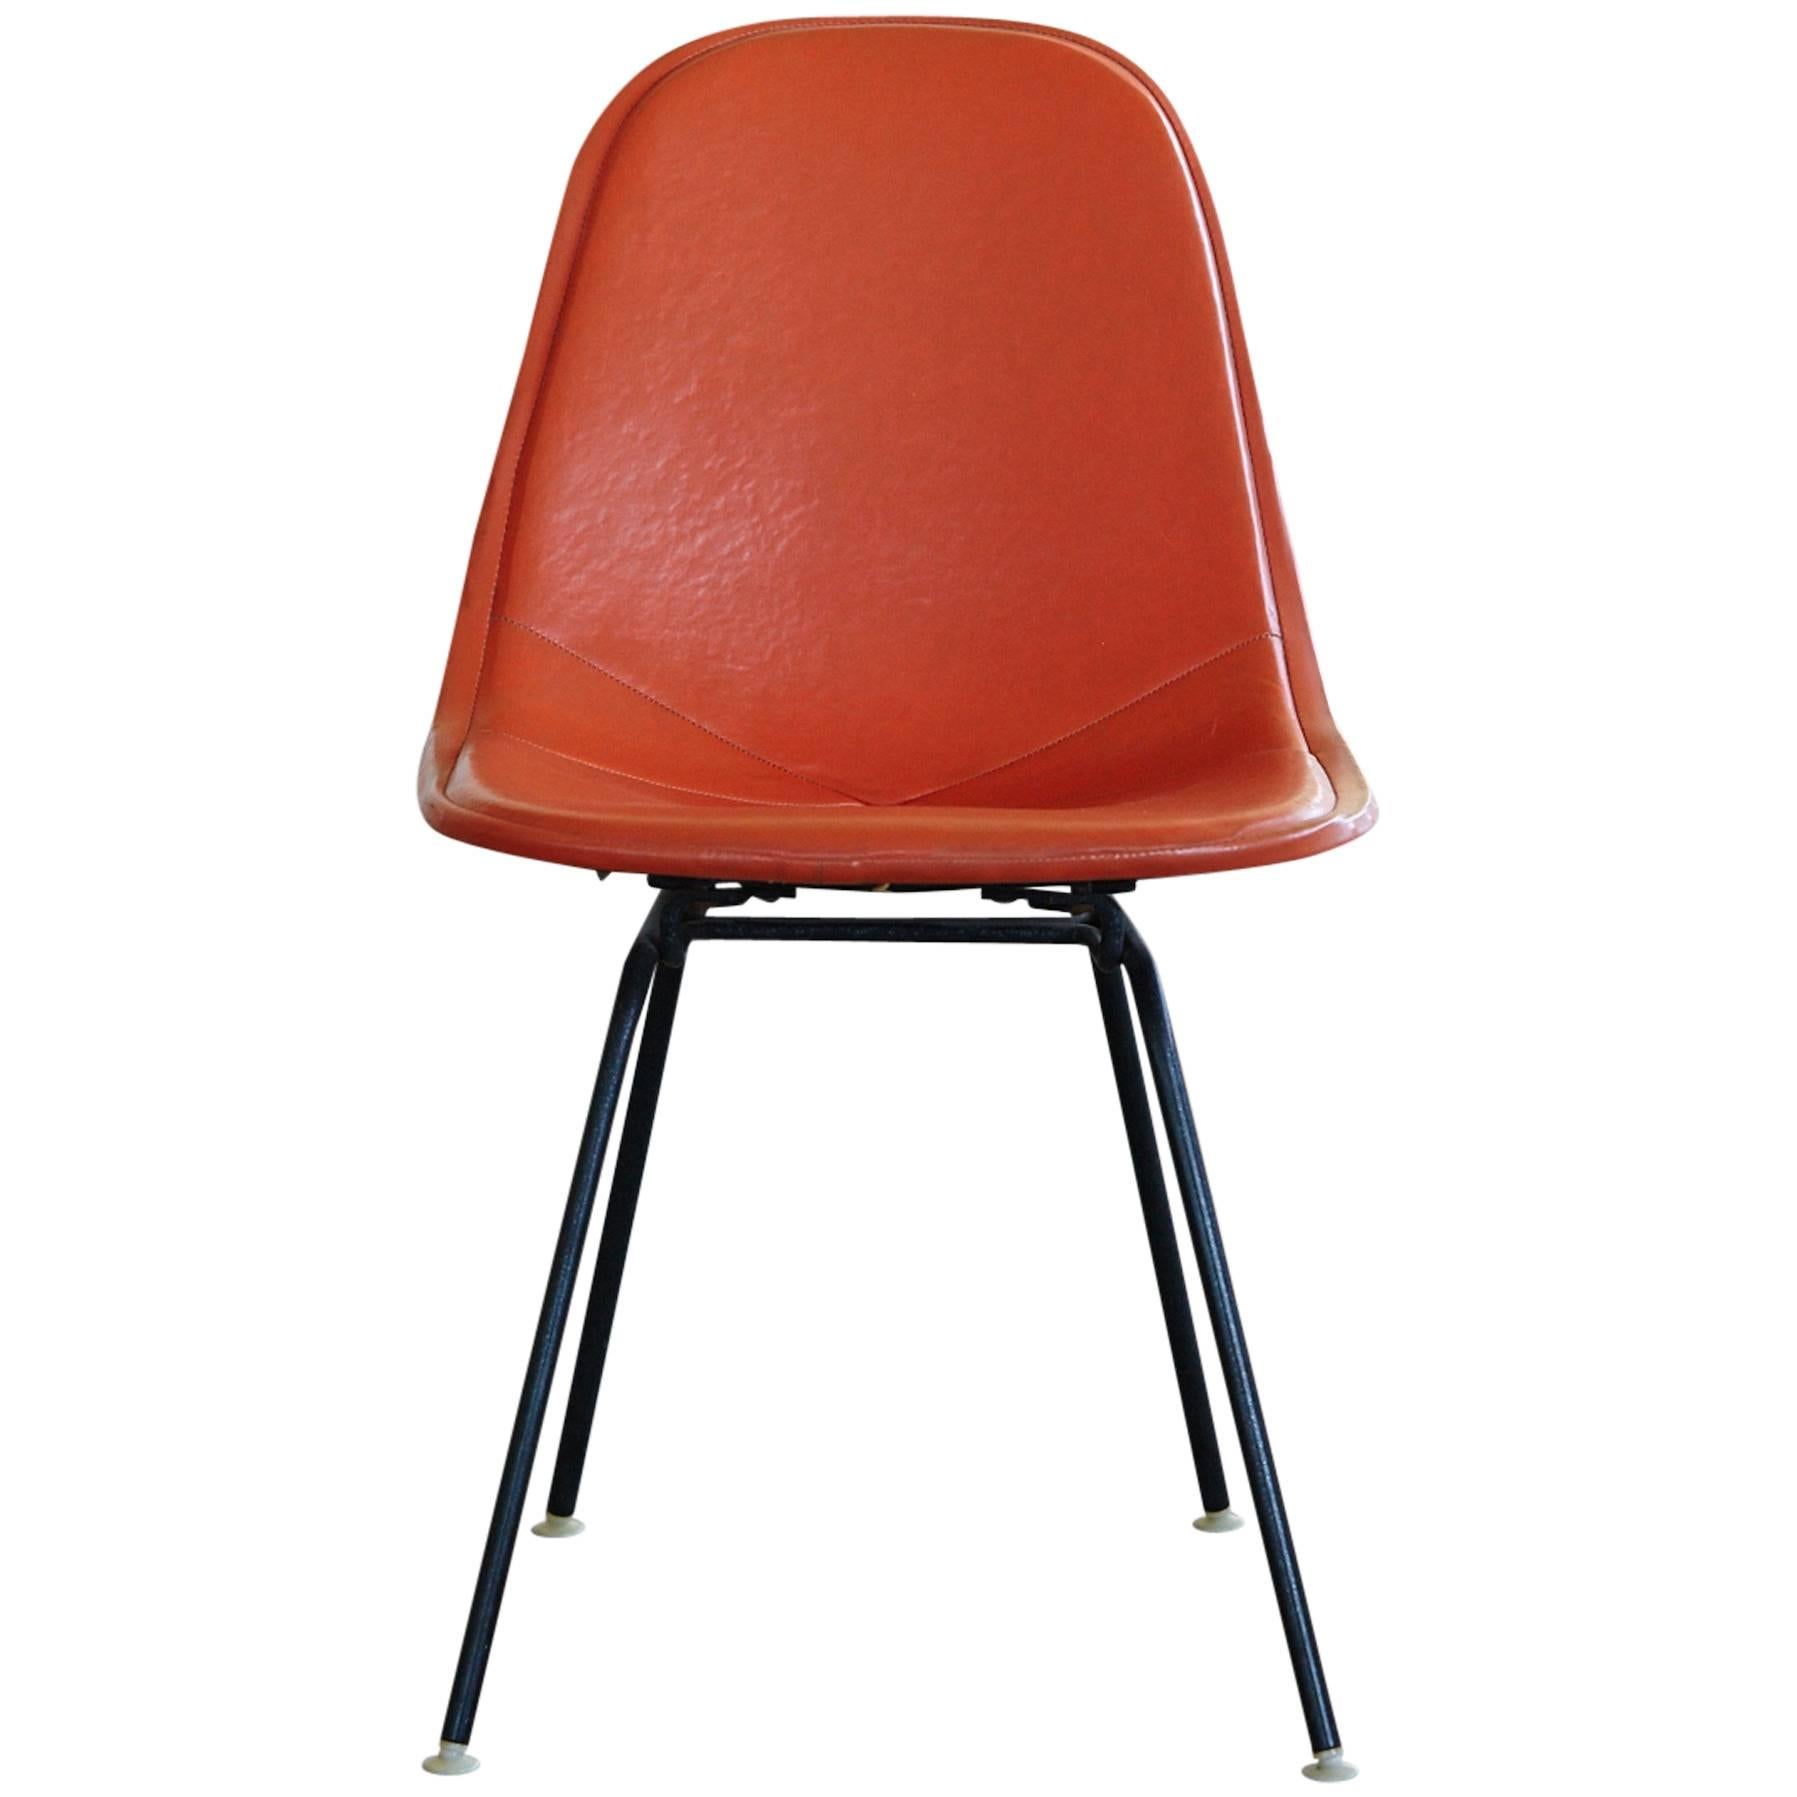 Original Eames DKX-1 Side Chair in Orange Leather for Herman Miller, 1960s For Sale